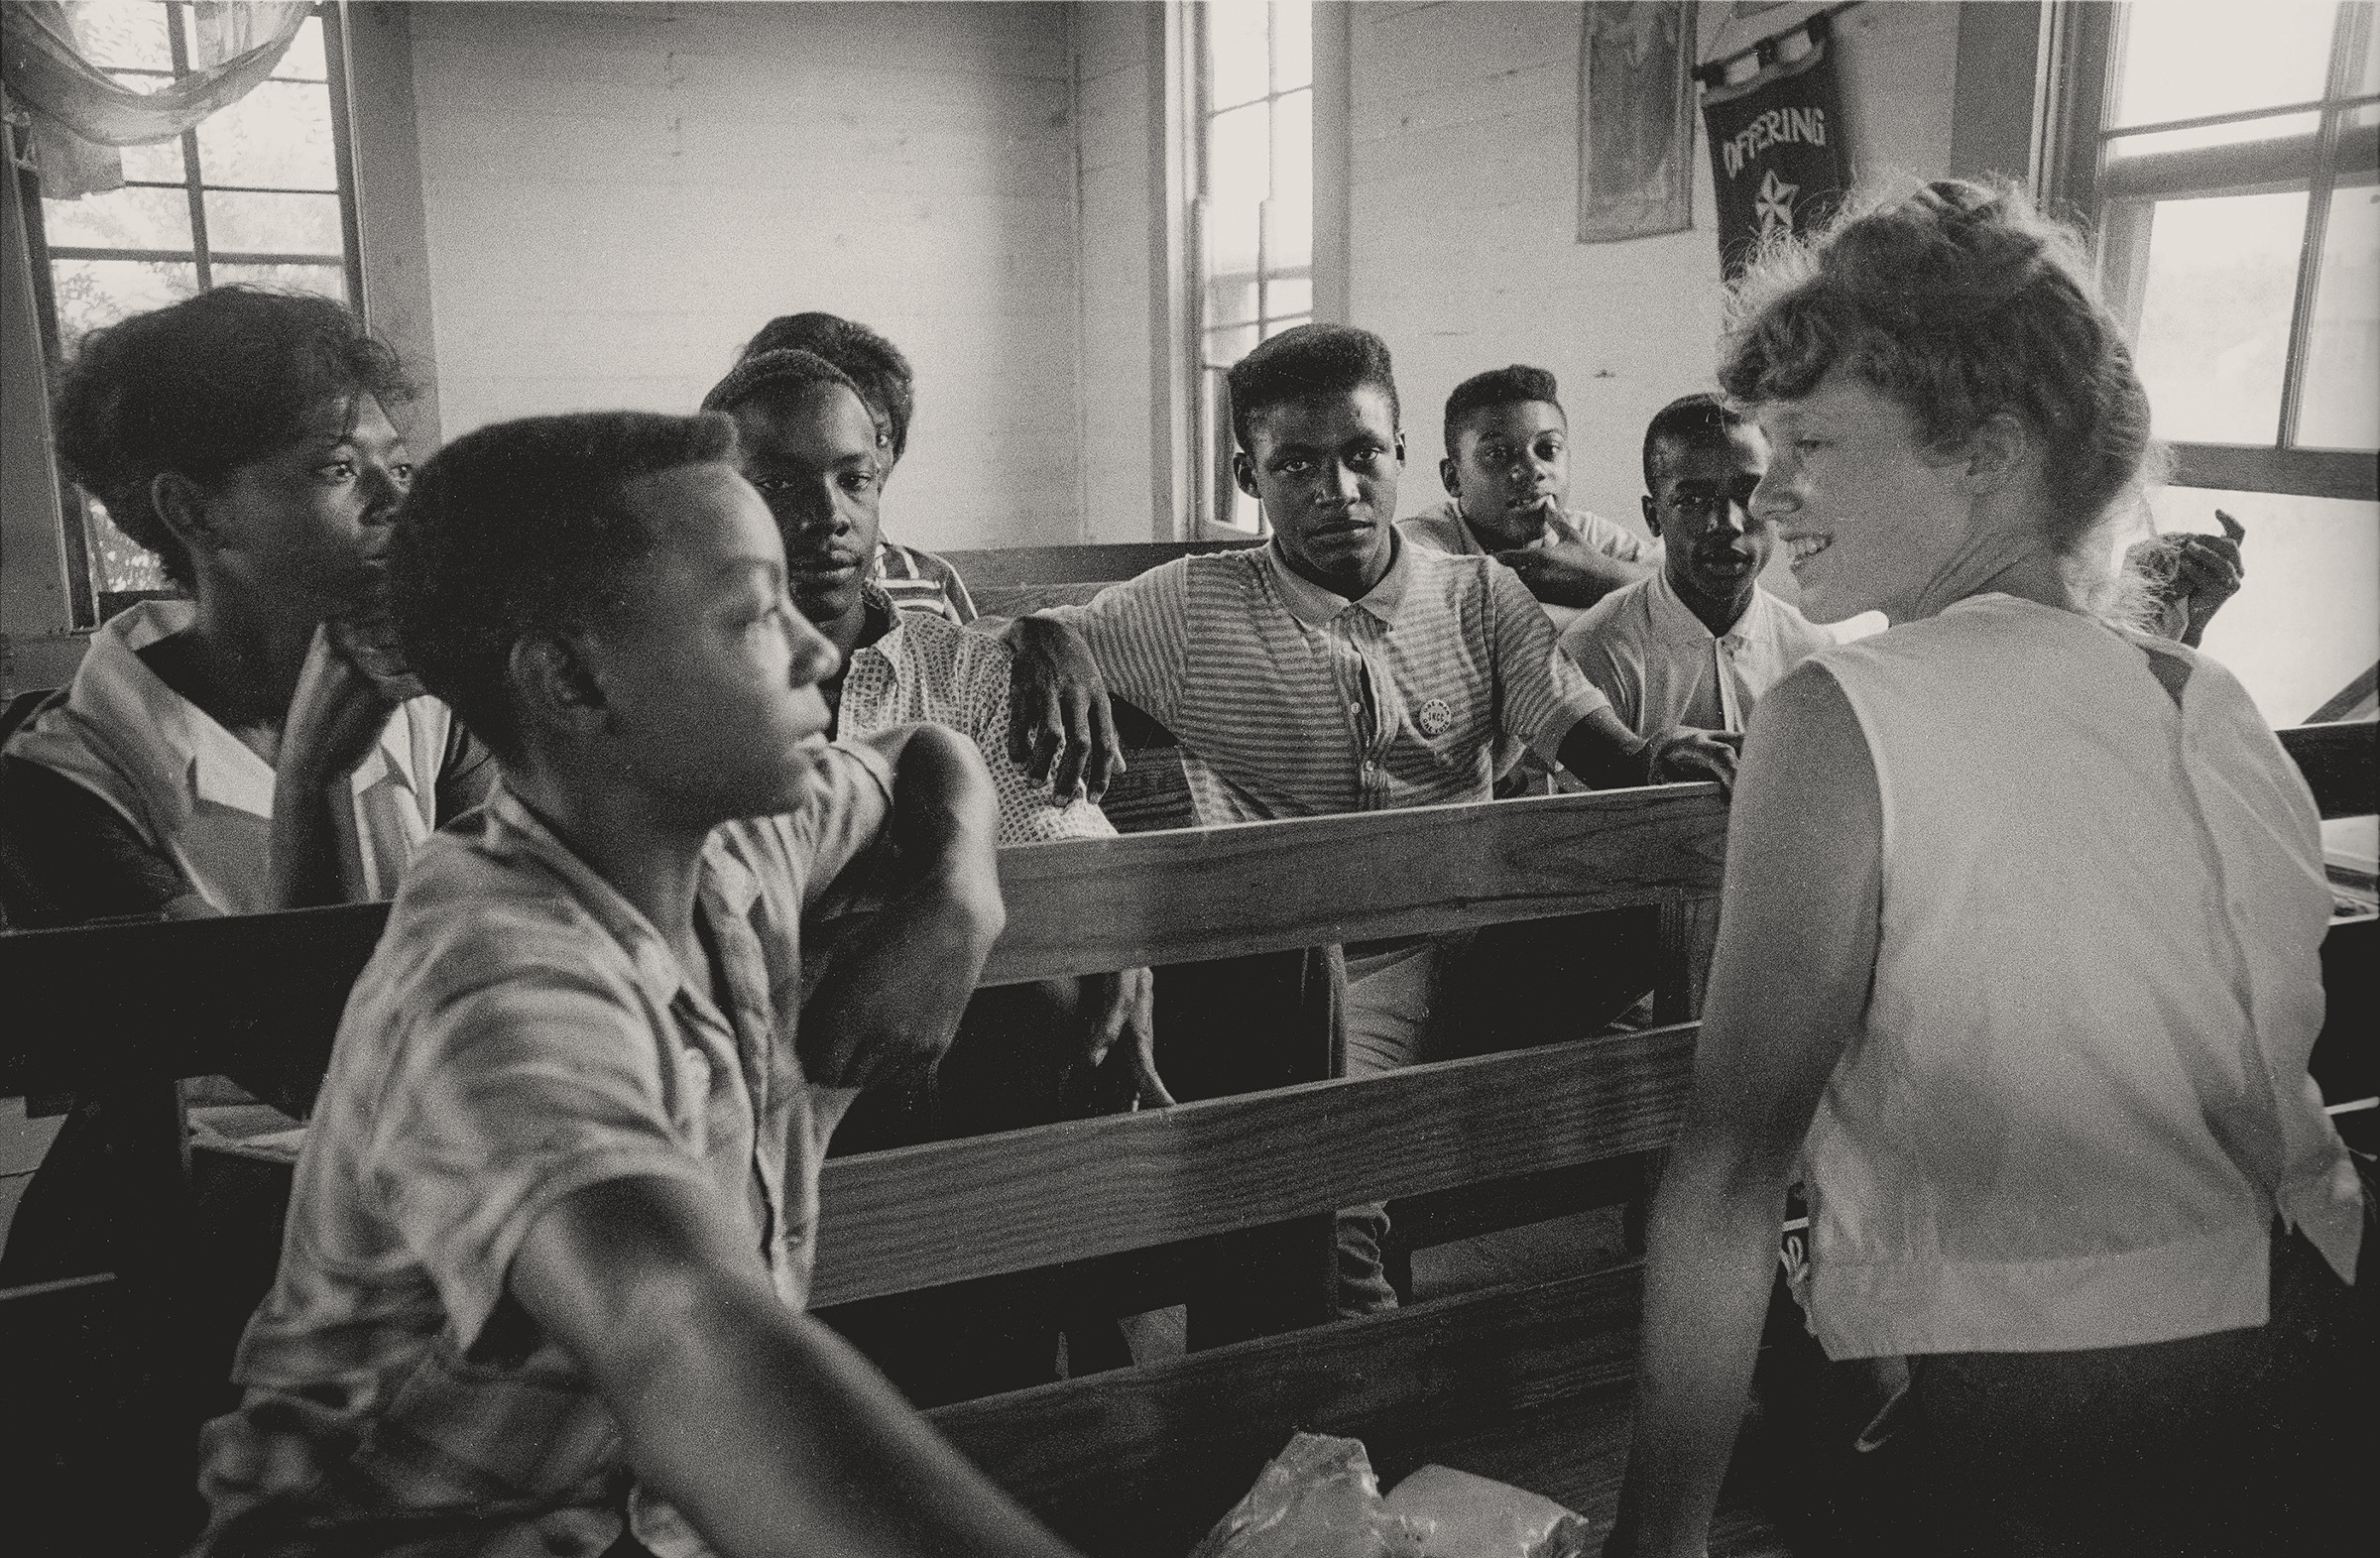 Freedom School, Mileston, Mississippi, August 1964. Photograph by Matt Herron. Edie Black, a volunteer from Smith College, teaches at a Freedom School in Mileston, a community of independent Black farmers in the Mississippi Delta. &copy; 1976, Matt Herron / Photograph provided by TakeStock.